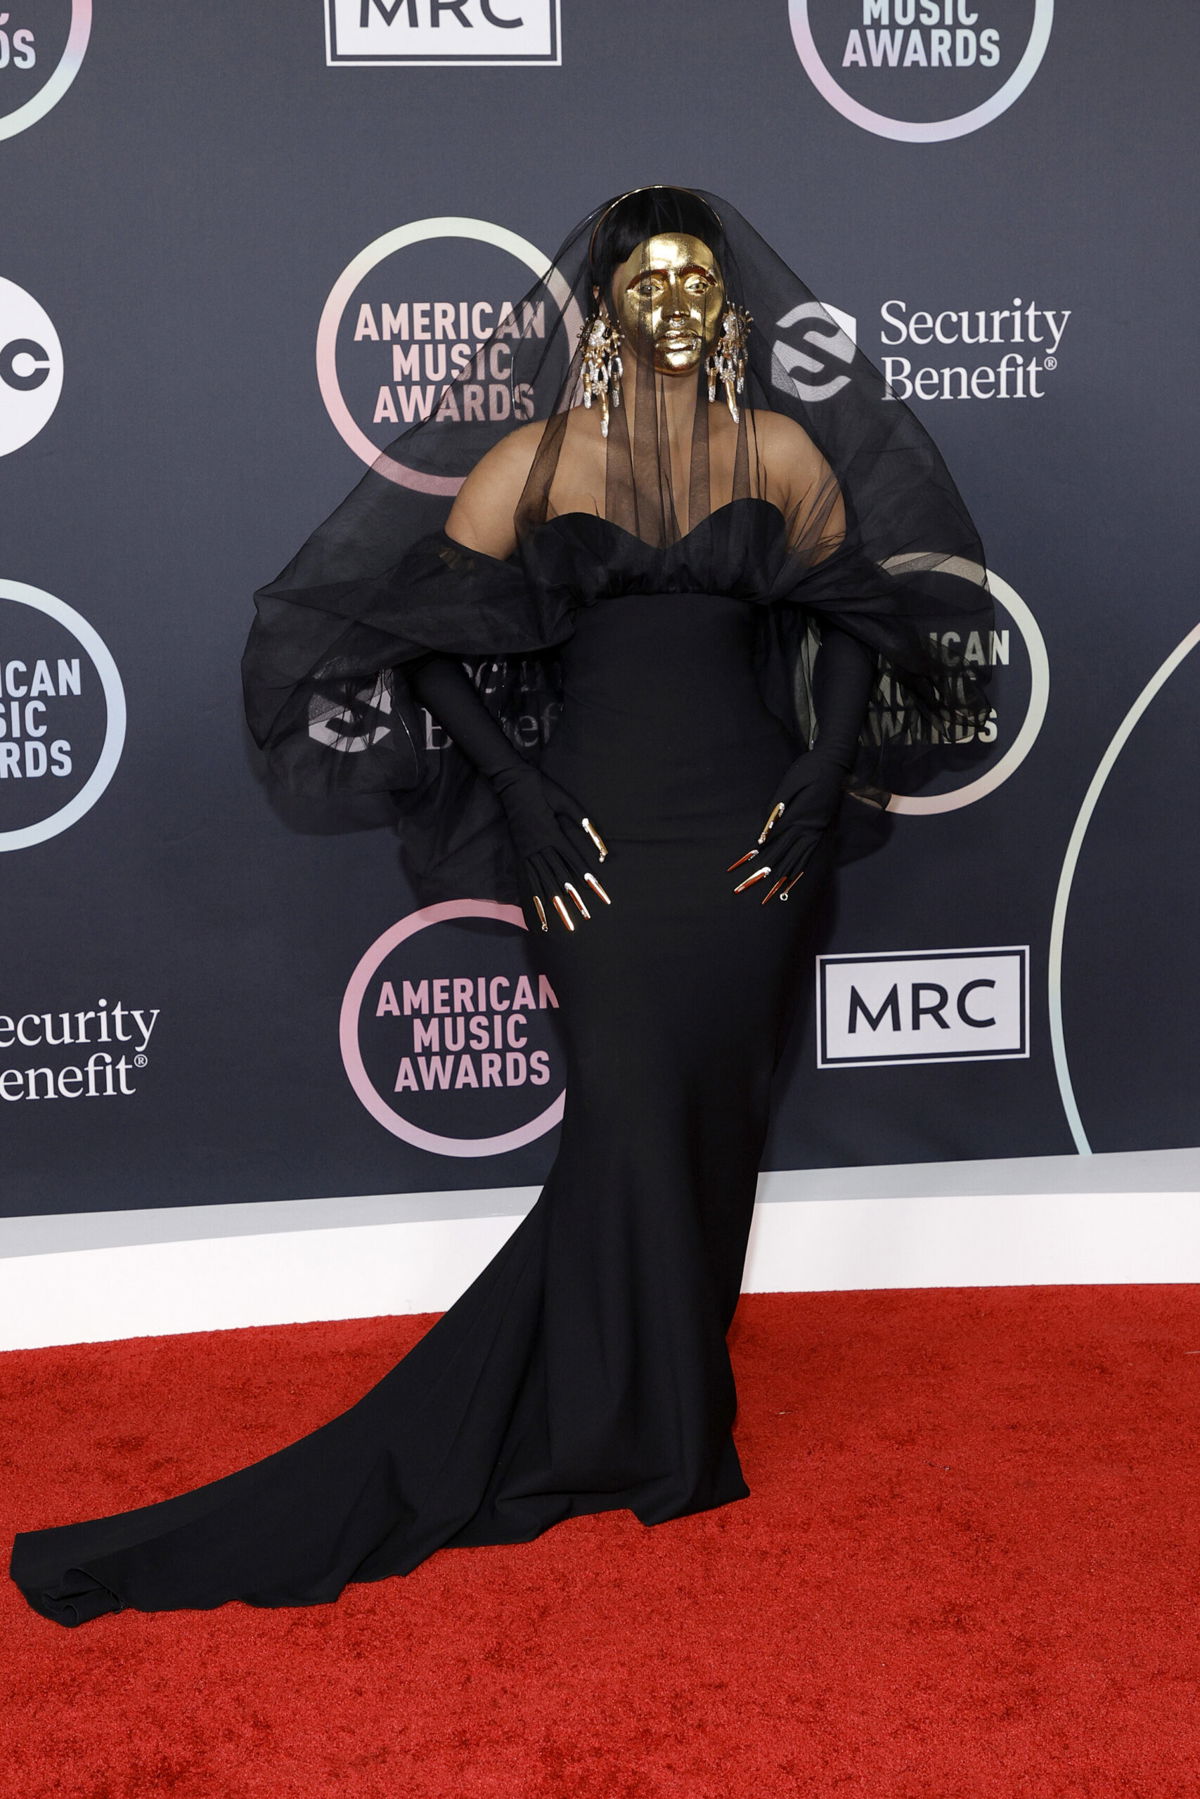 <i>Amy Sussman/Getty Images</i><br/>Cardi B attends the 2021 American Music Awards at Microsoft Theater on November 21